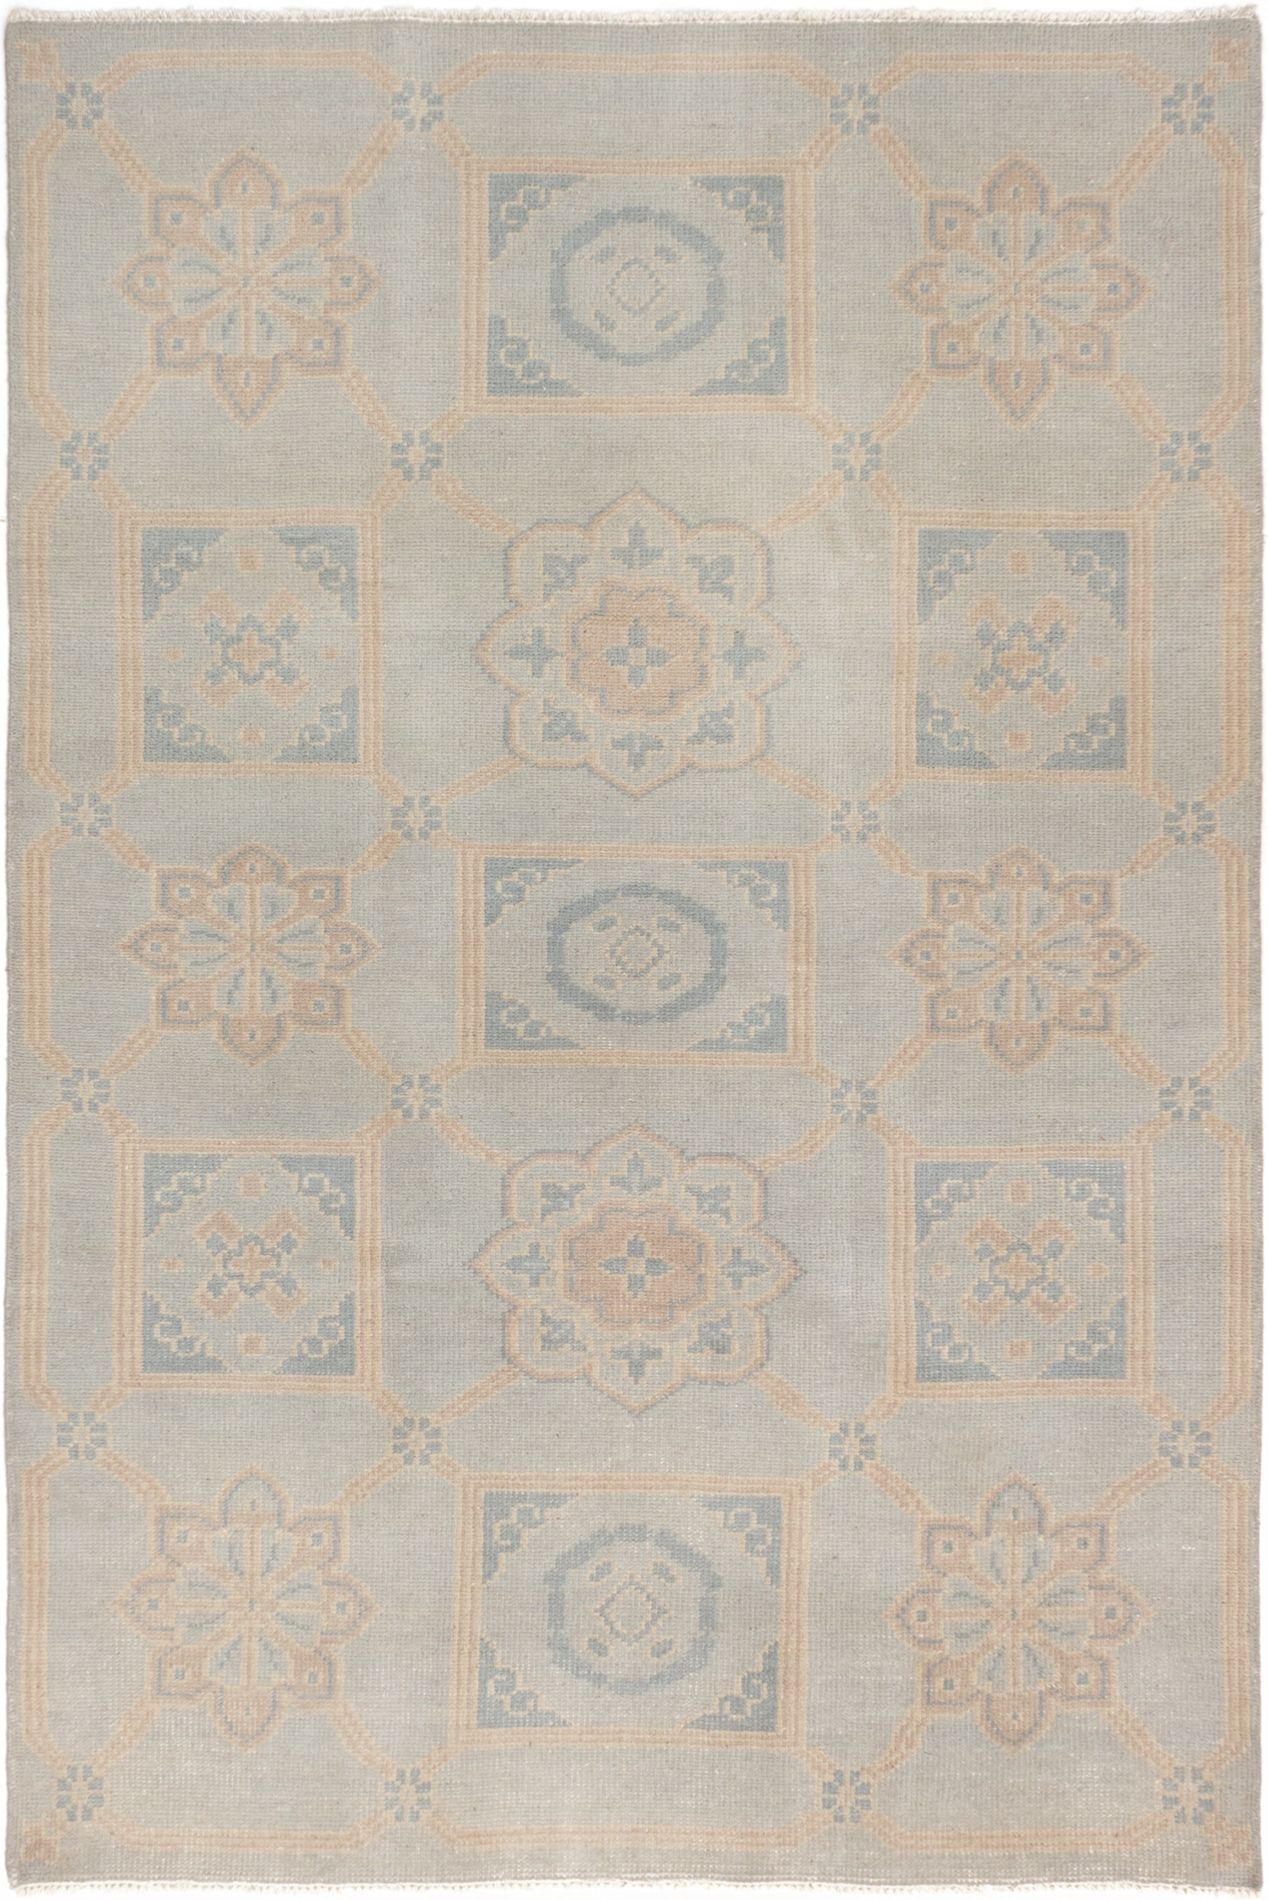 Hand-knotted Eternity Grey Wool Rug 6'3" x 9'1" Size: 6'3" x 9'1"  